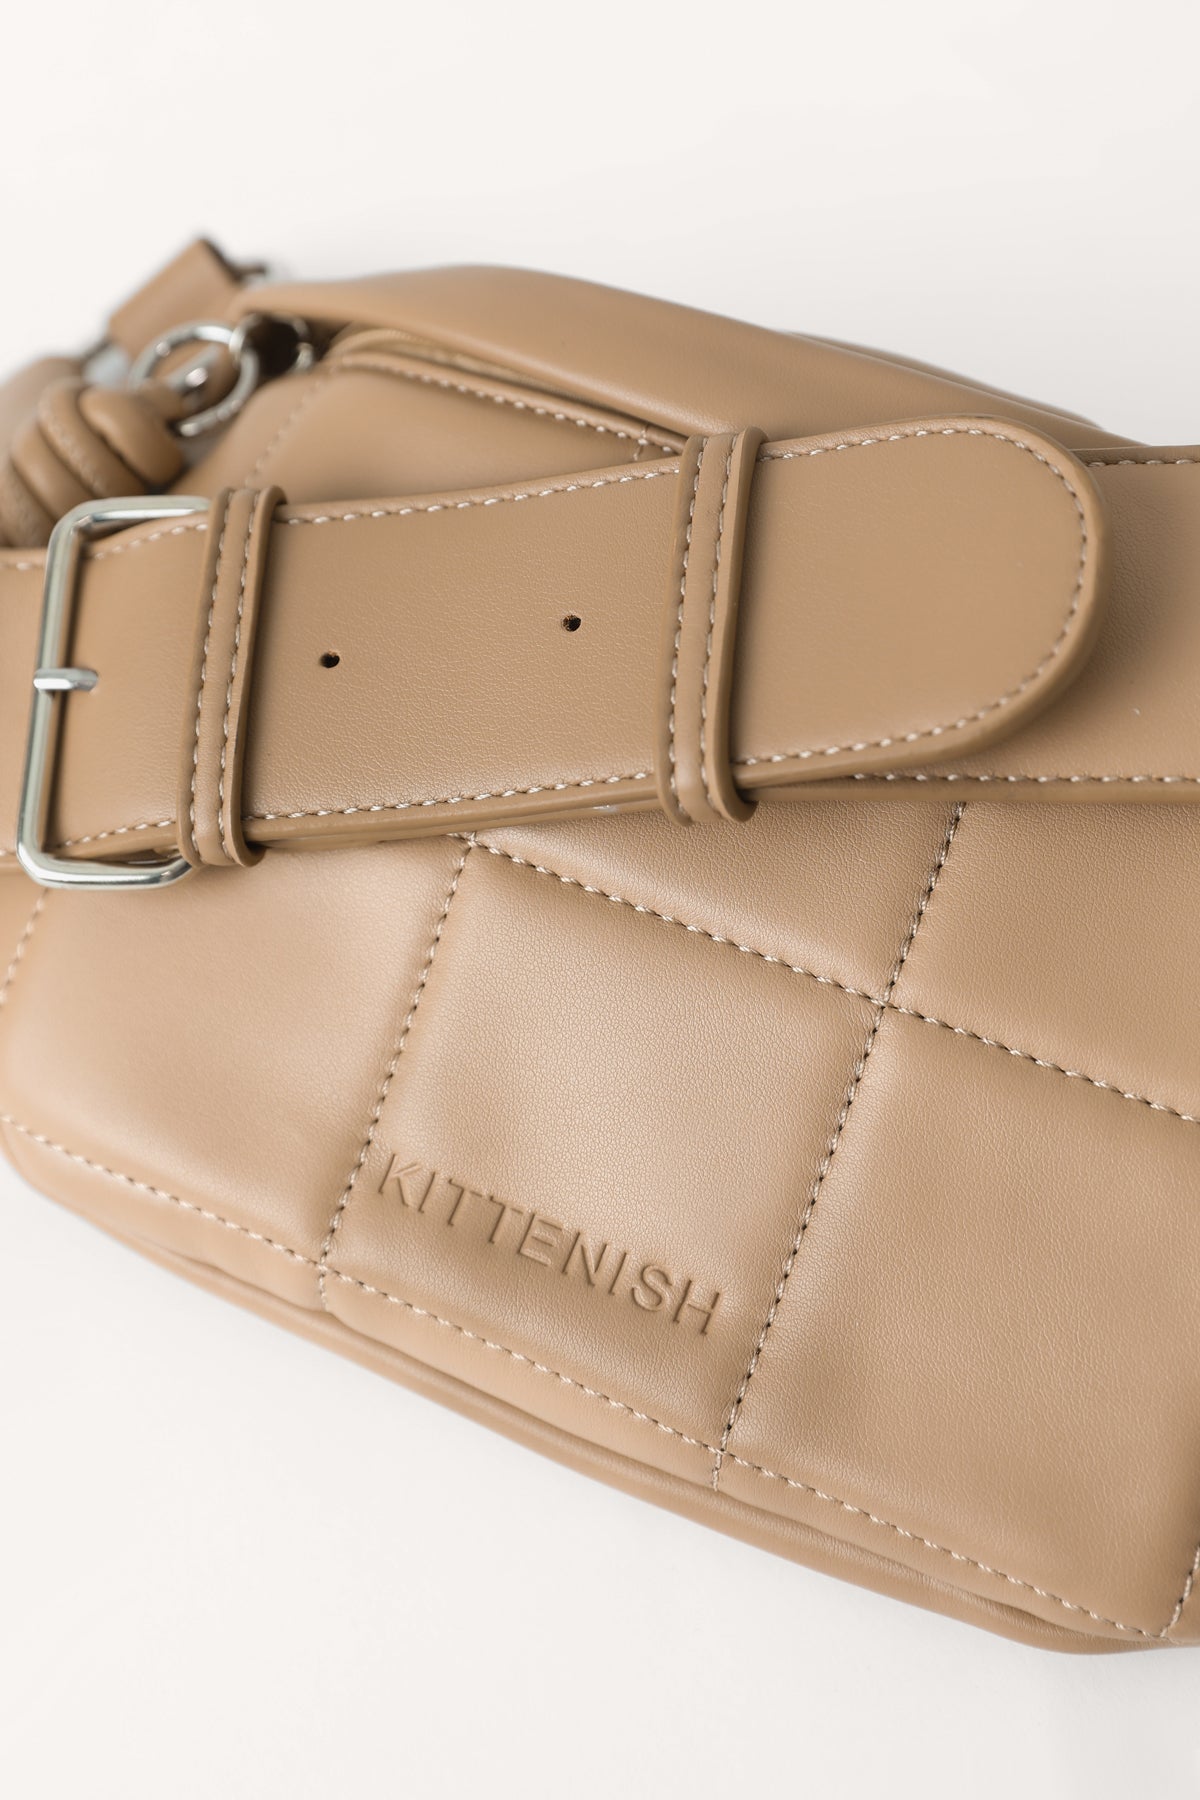 TAN QUILTED FANNY PACK